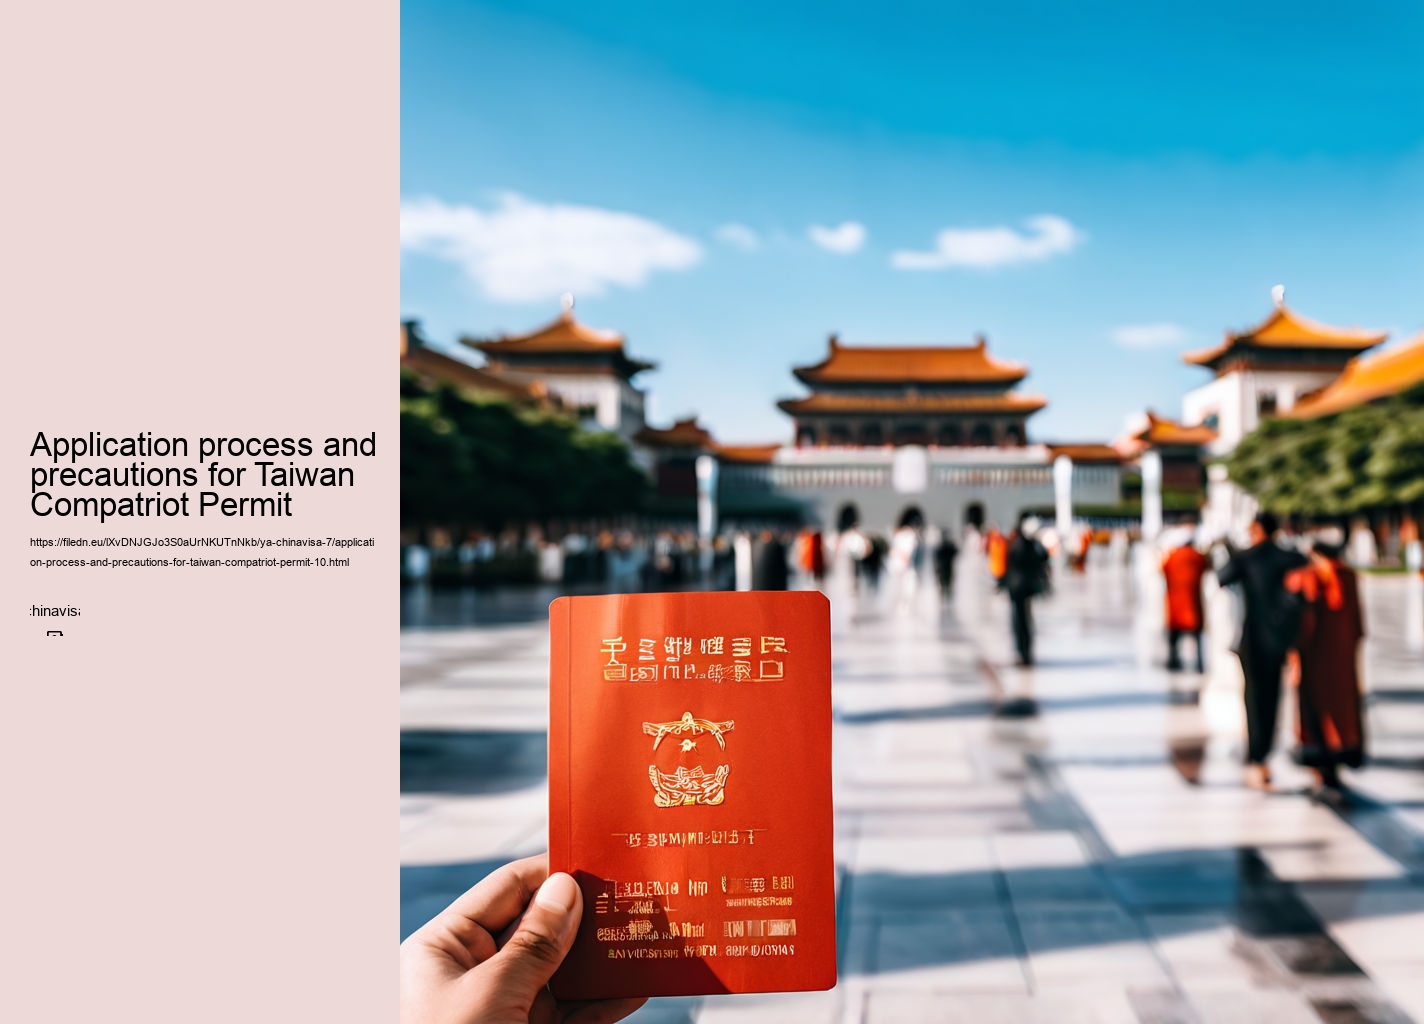 Application process and precautions for Taiwan Compatriot Permit